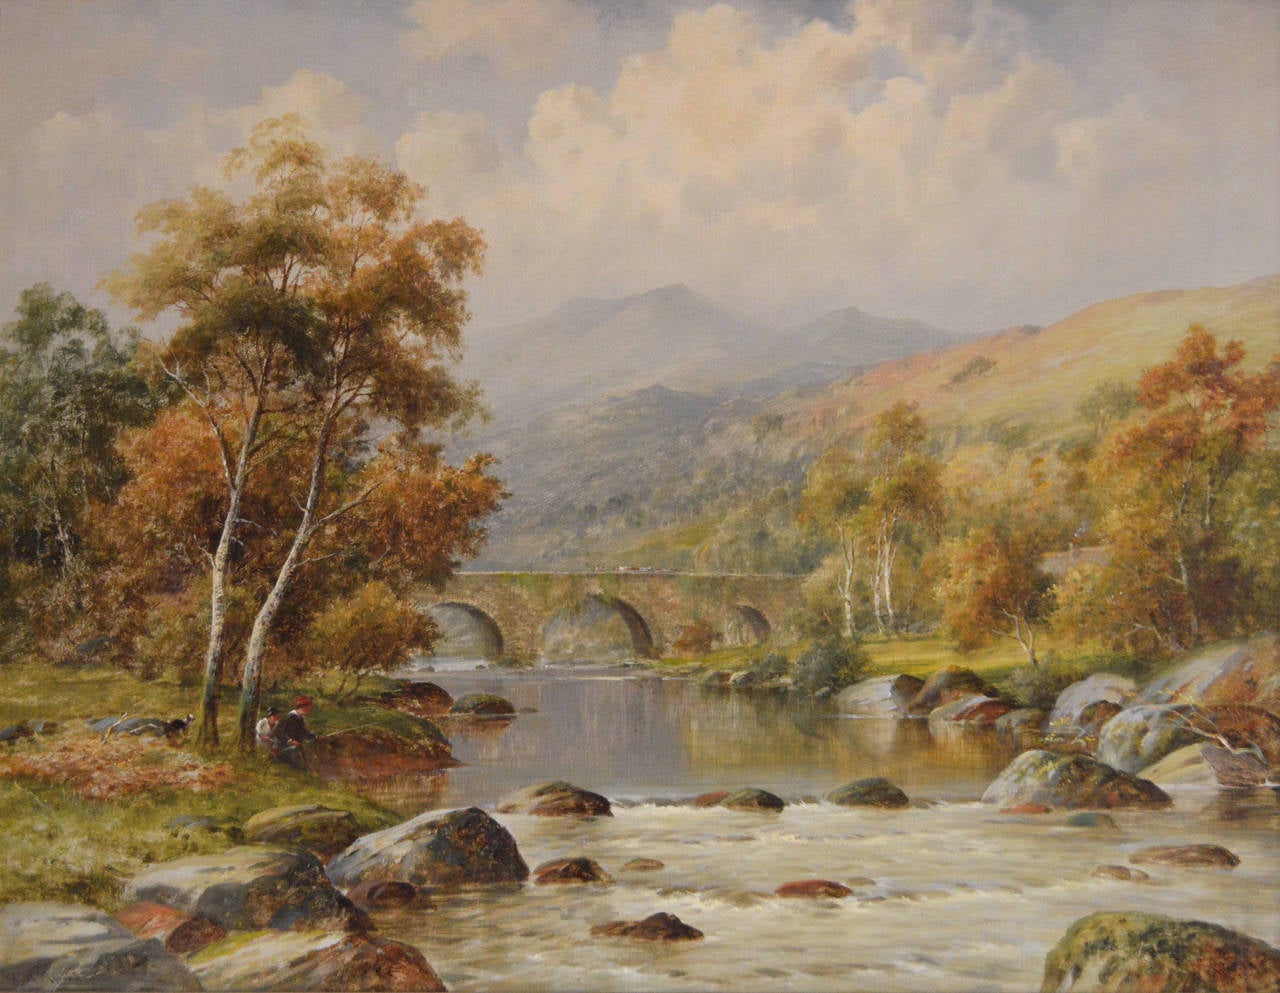 The Old Bridge near Betws-y-coed, oil on canvas - Painting by William Henry Mander